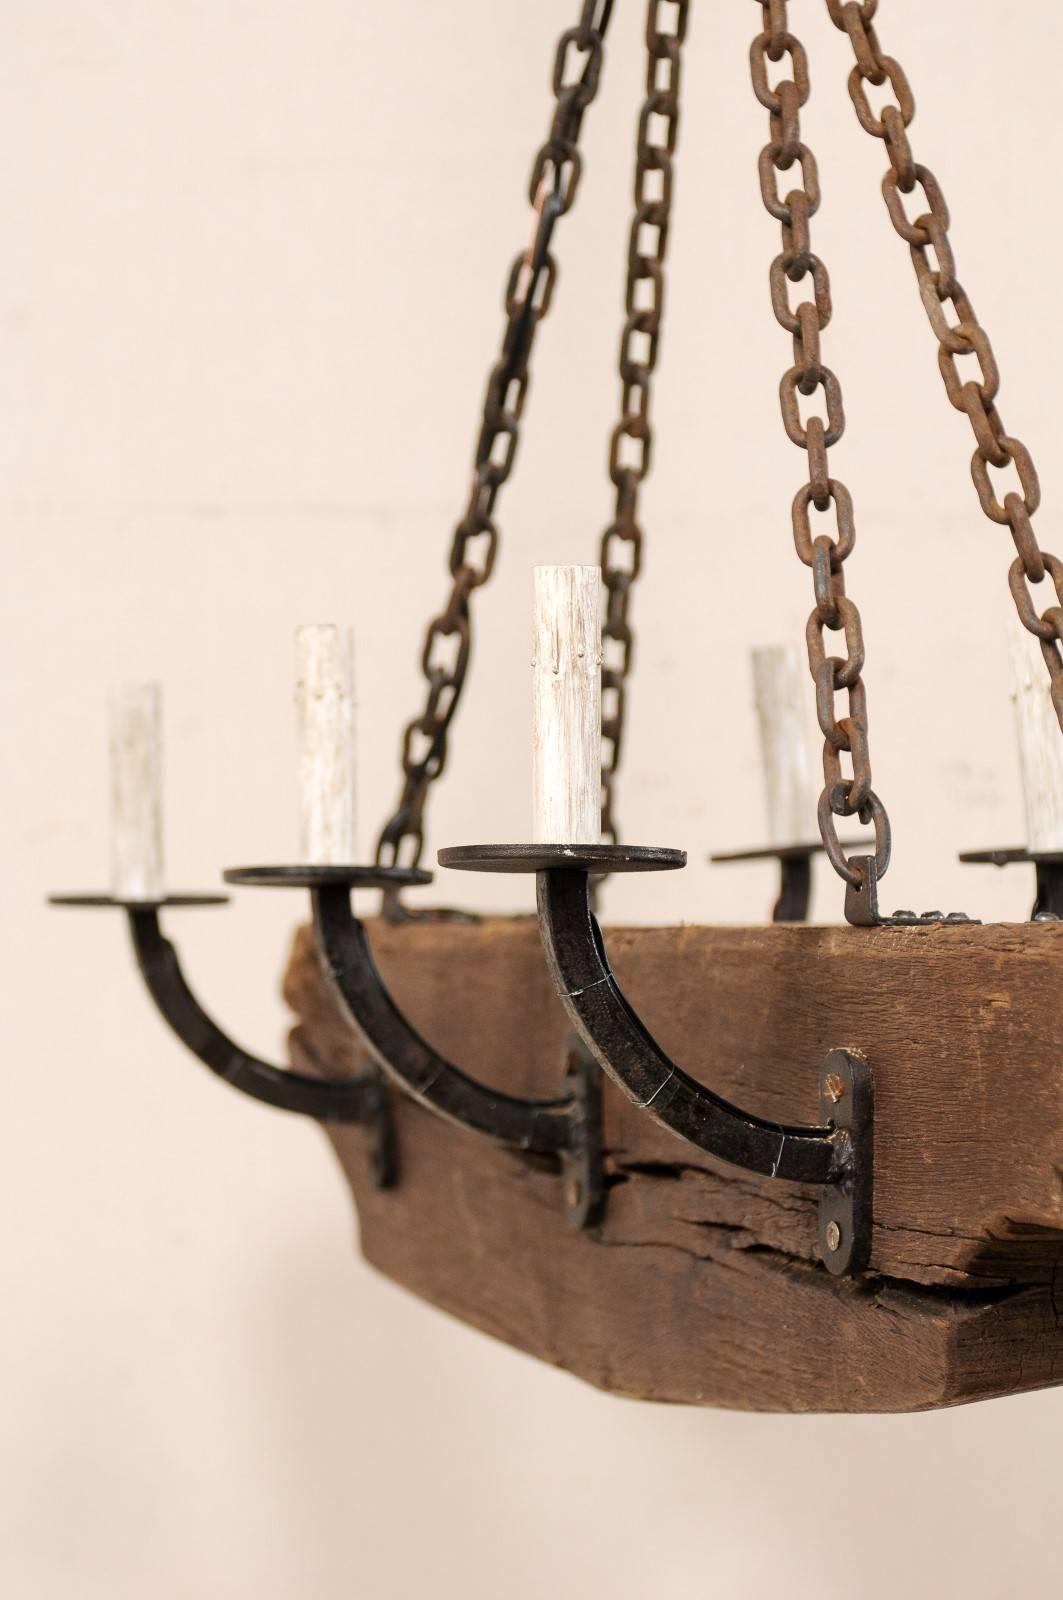 Metal French Rustic Wood Beam Chandelier with Six Forged Iron Arms, Mid 20th C. For Sale